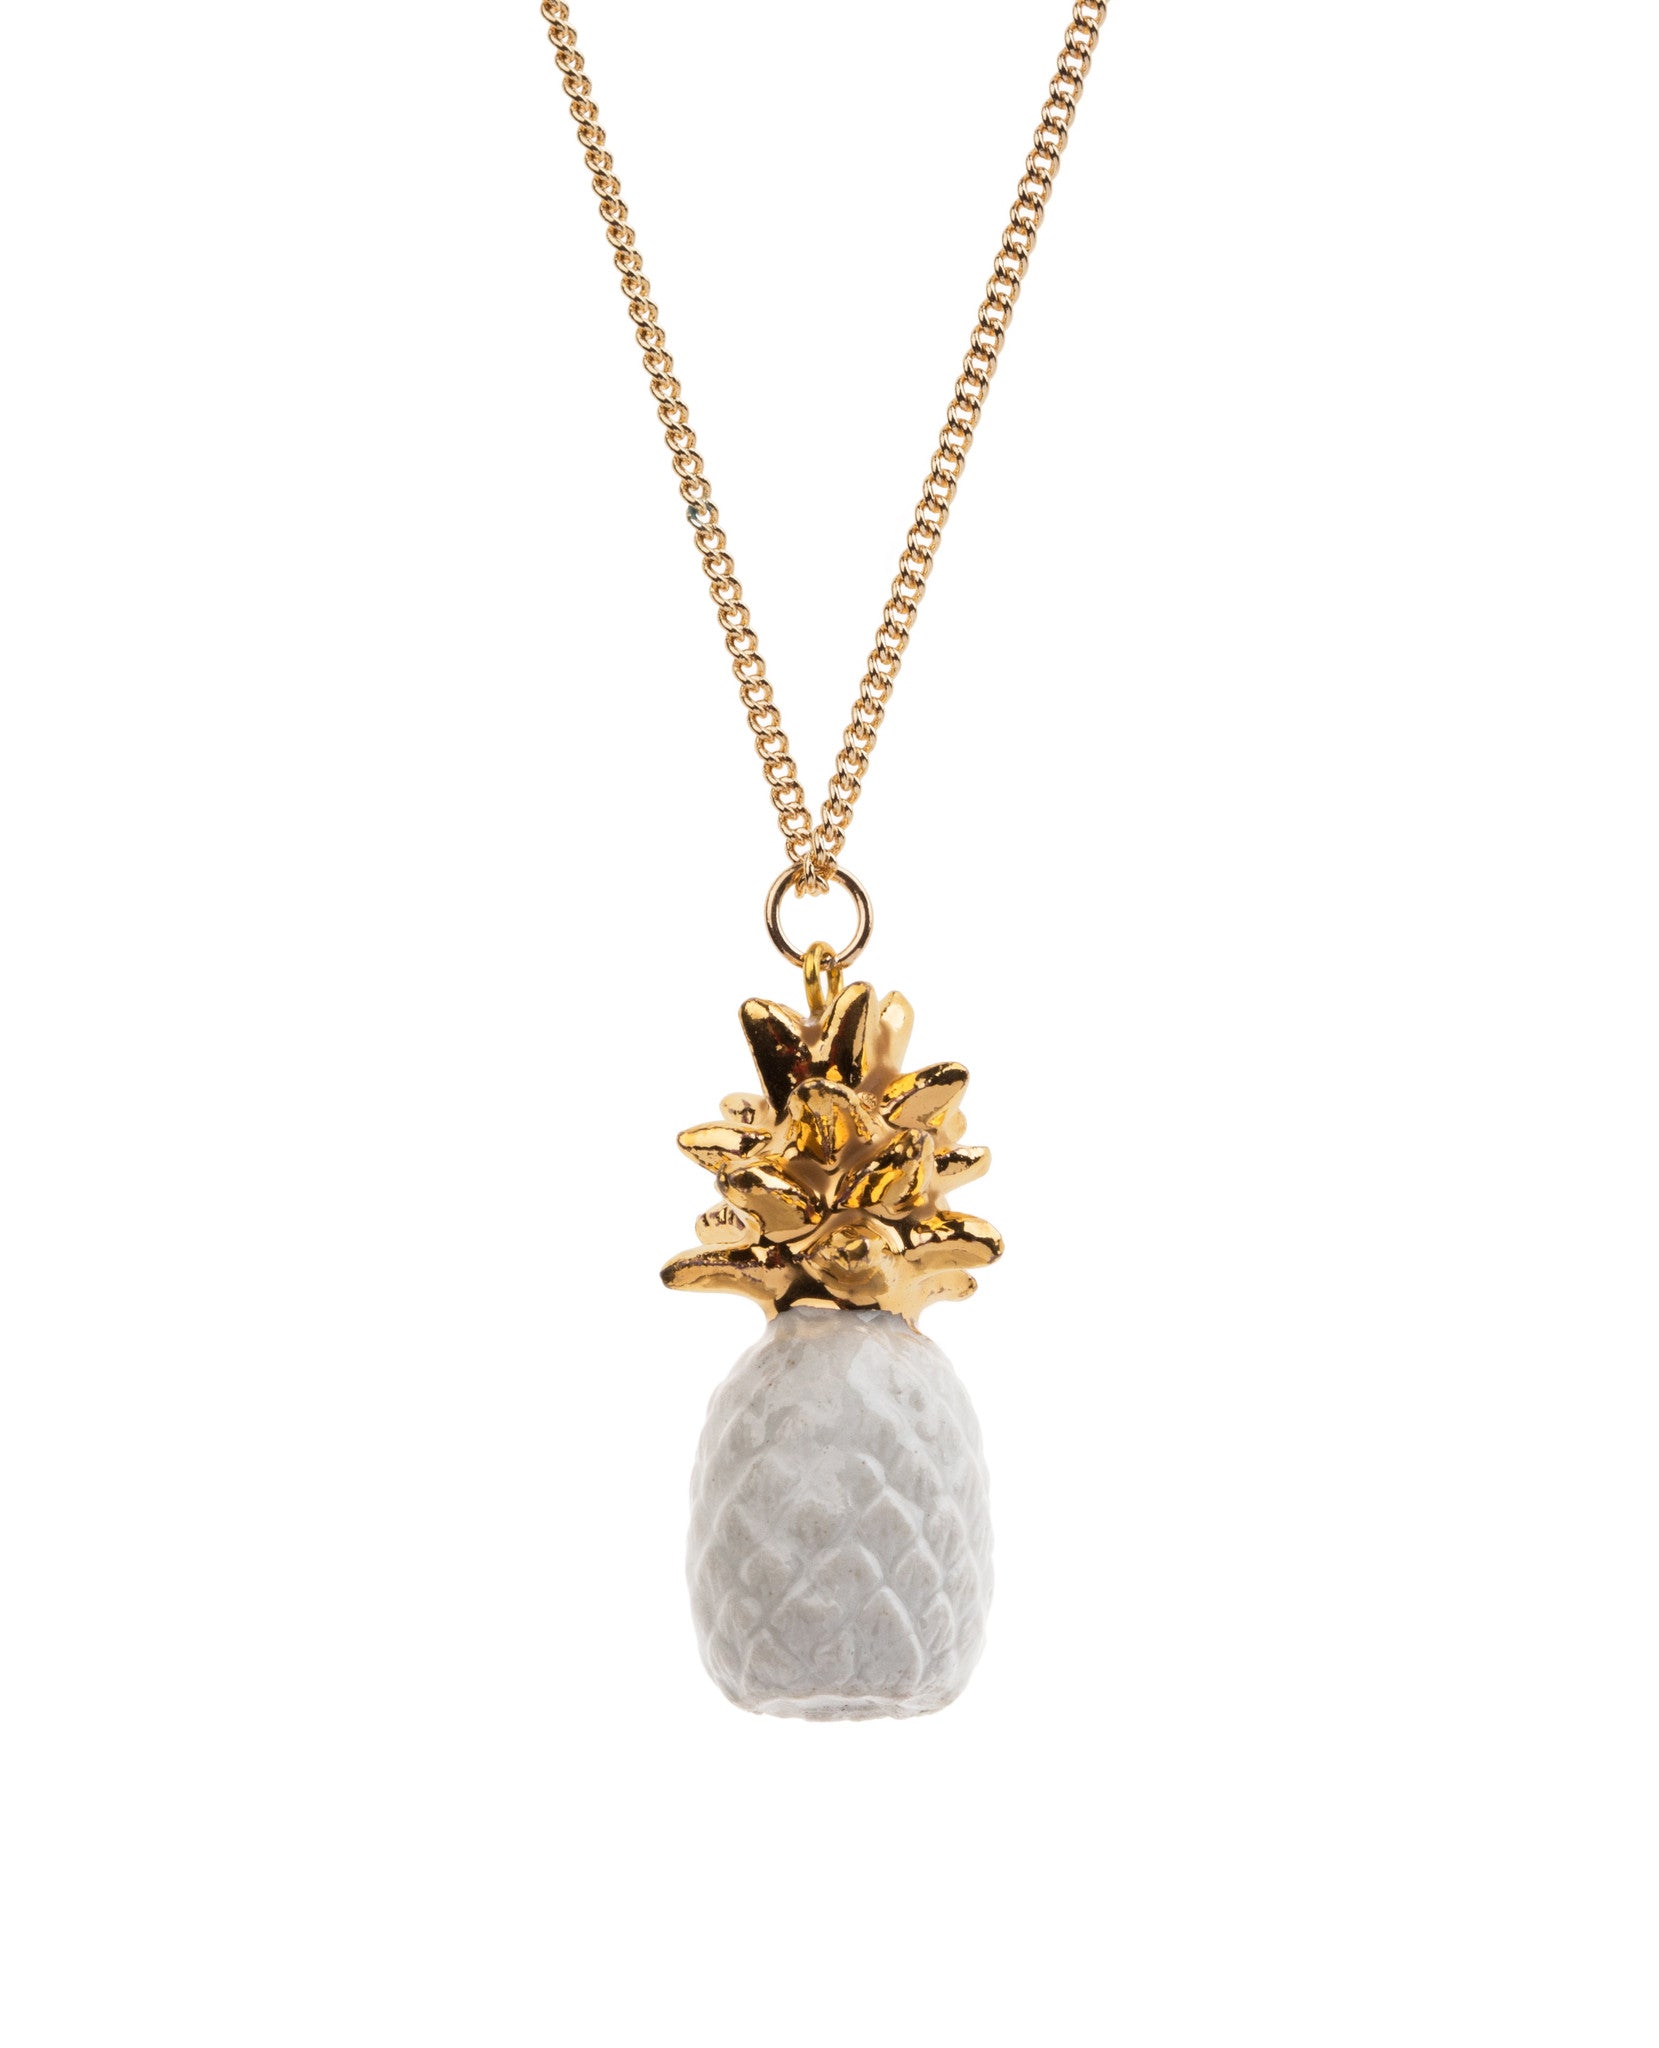 Small White & Gold Pineapple Necklace